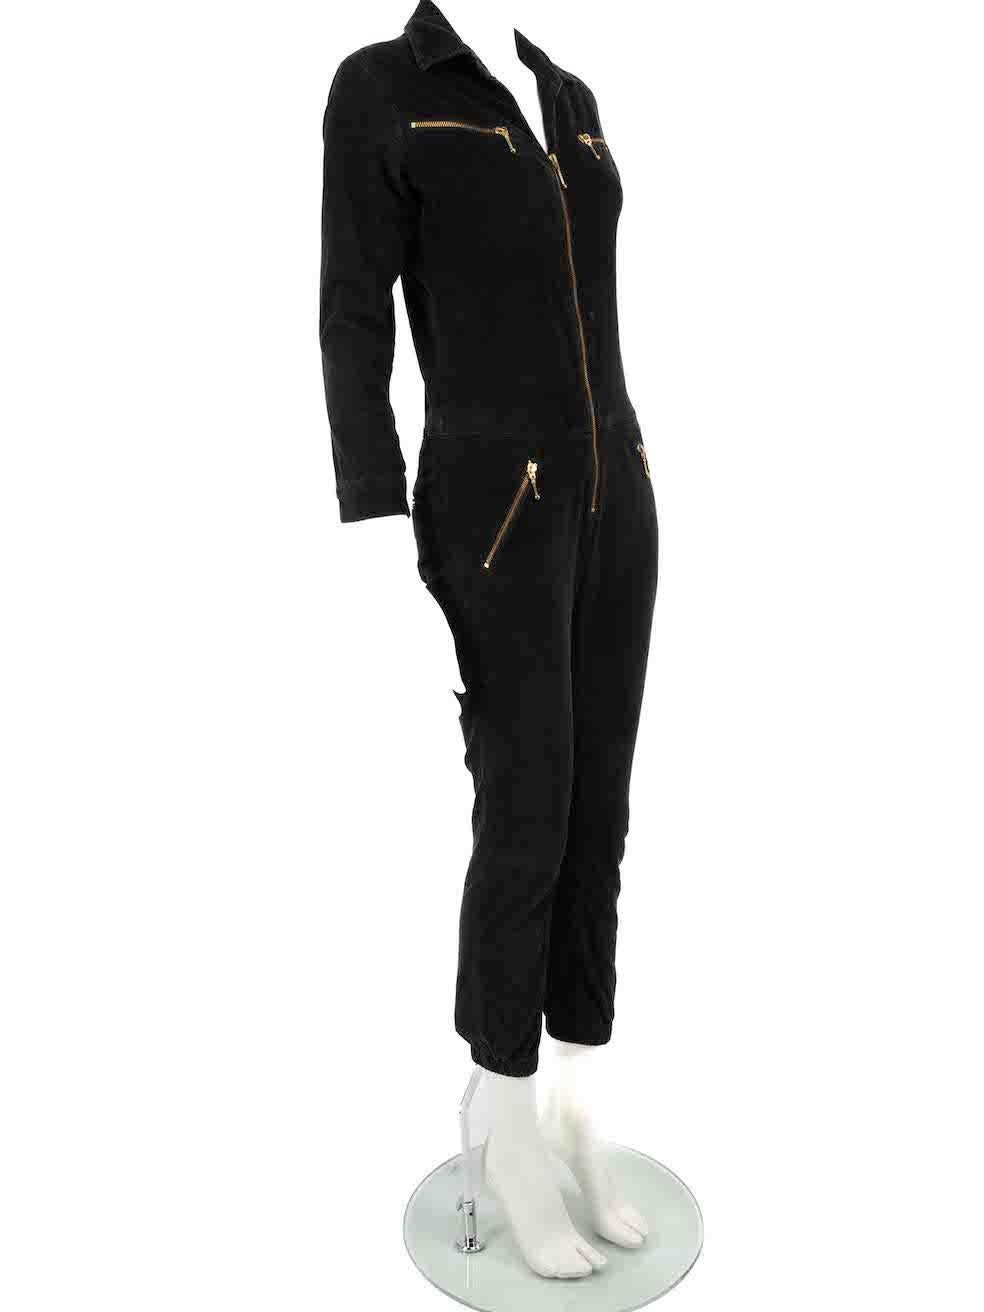 CONDITION is Good. Minor wear to the jumpsuit is evident. Light wear to the fabric surface which has a general washed appearance as well as a handful of small discoloured marks through the centre front and inside the collar on this used Ida designer